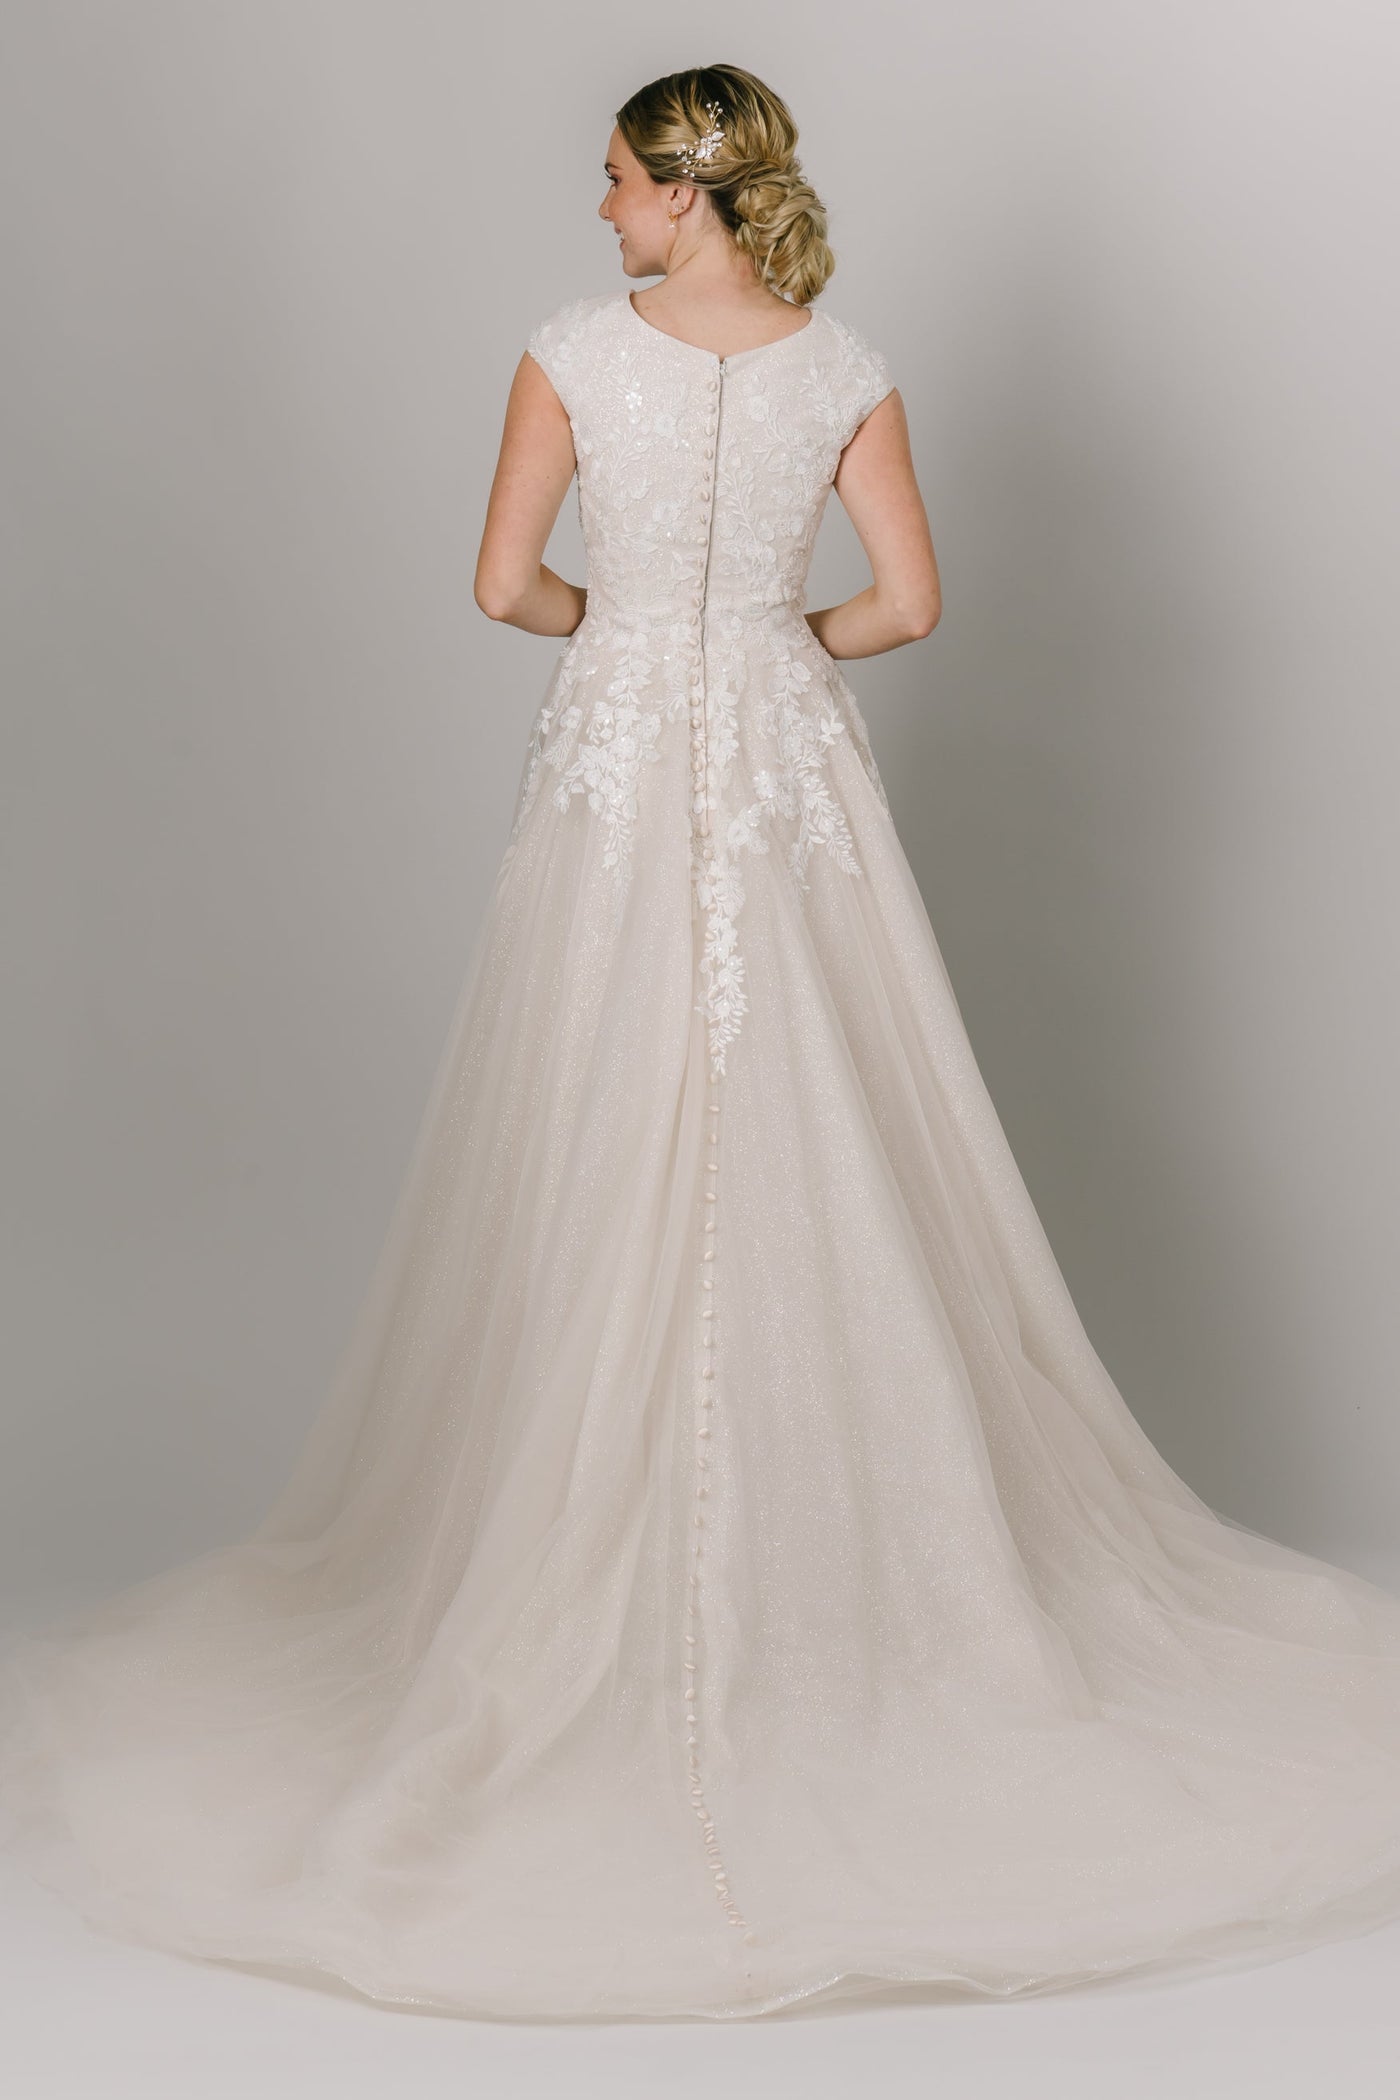 This Modest Wedding Dress features a round neckline, and lace appliques that trickle down the skirt with a glitter lining. - Modest Clothing - Modest Wedding Dresses - Modest Dresses - LatterDayBride